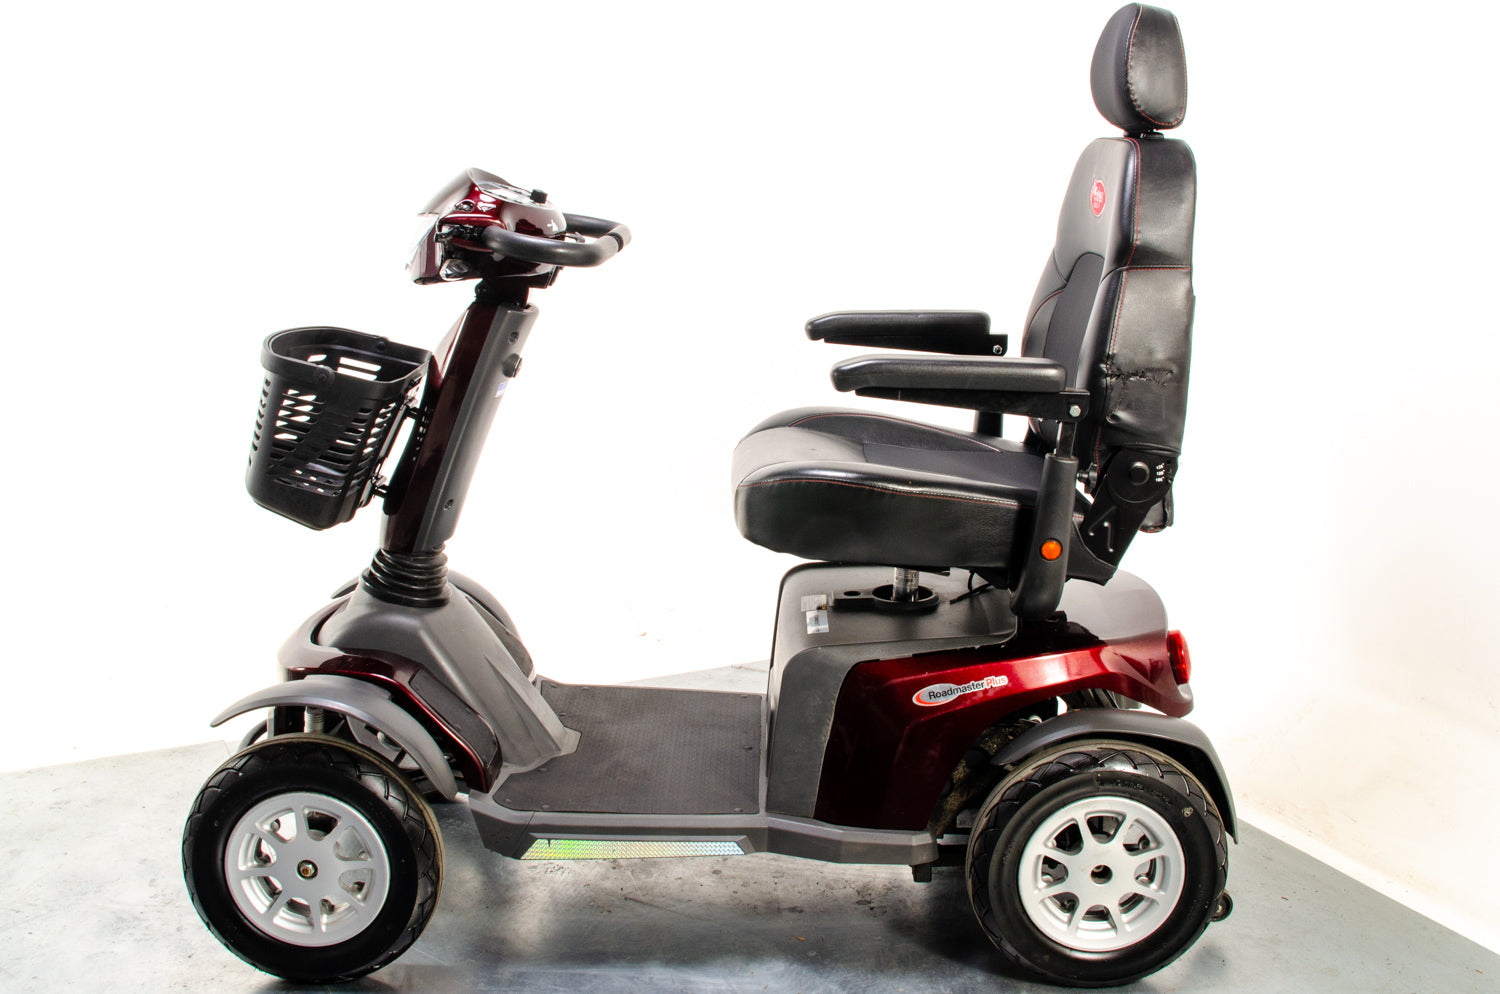 2020 Eden Roadmaster Plus Used Mobility Scooter 8mph Large All Terrain Luxury Electric 13285